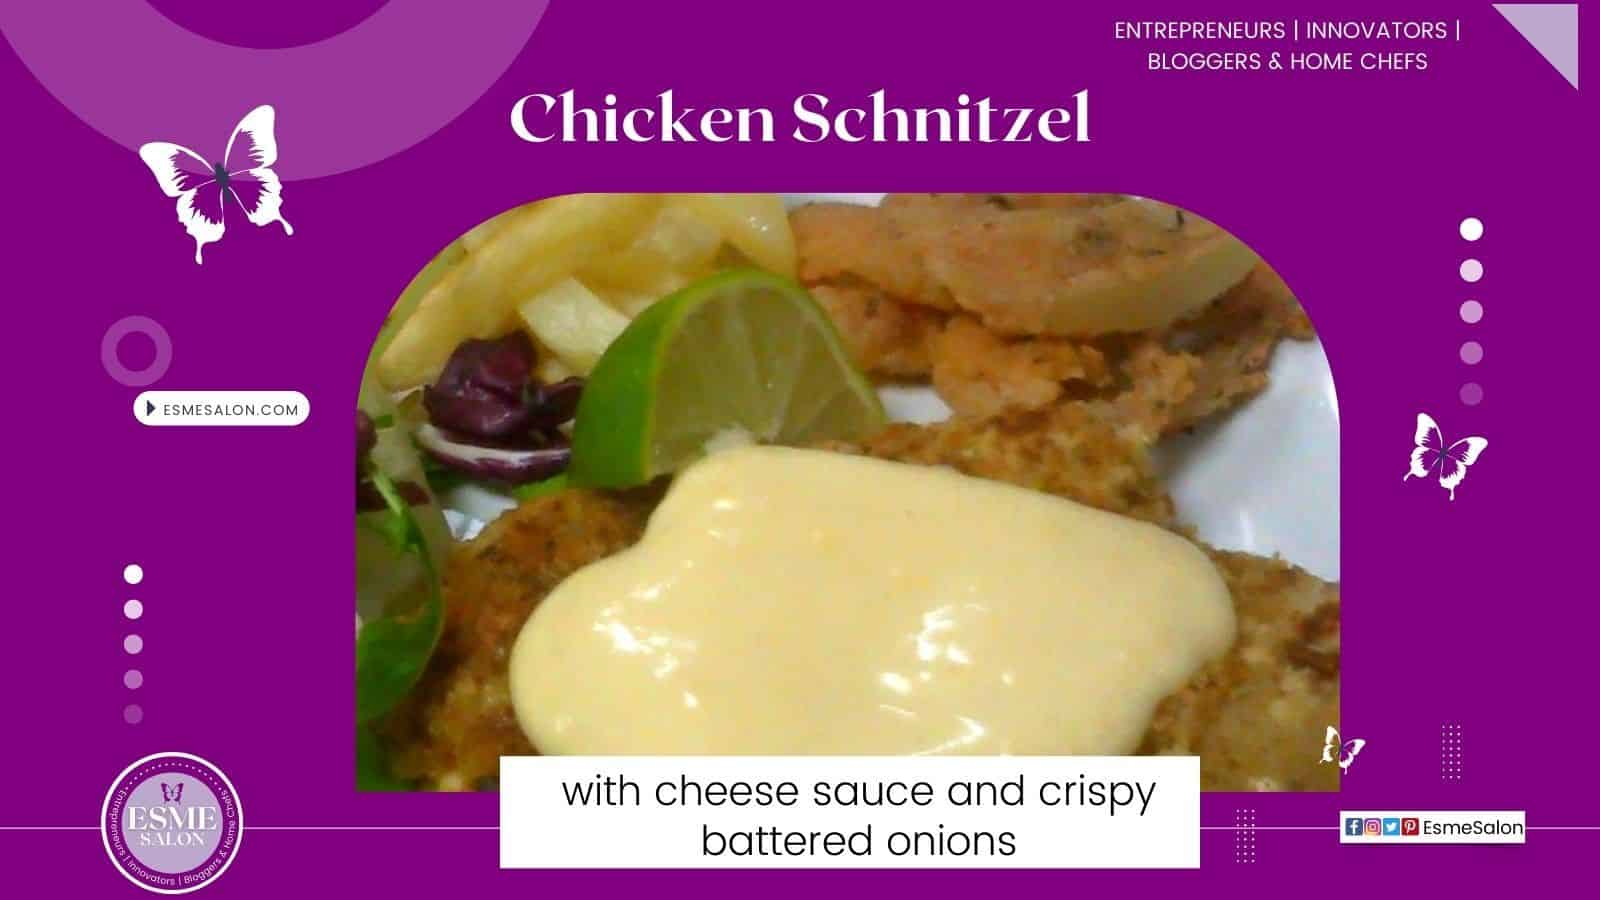 Chicken Schnitzel with cheese sauce and crispy onions